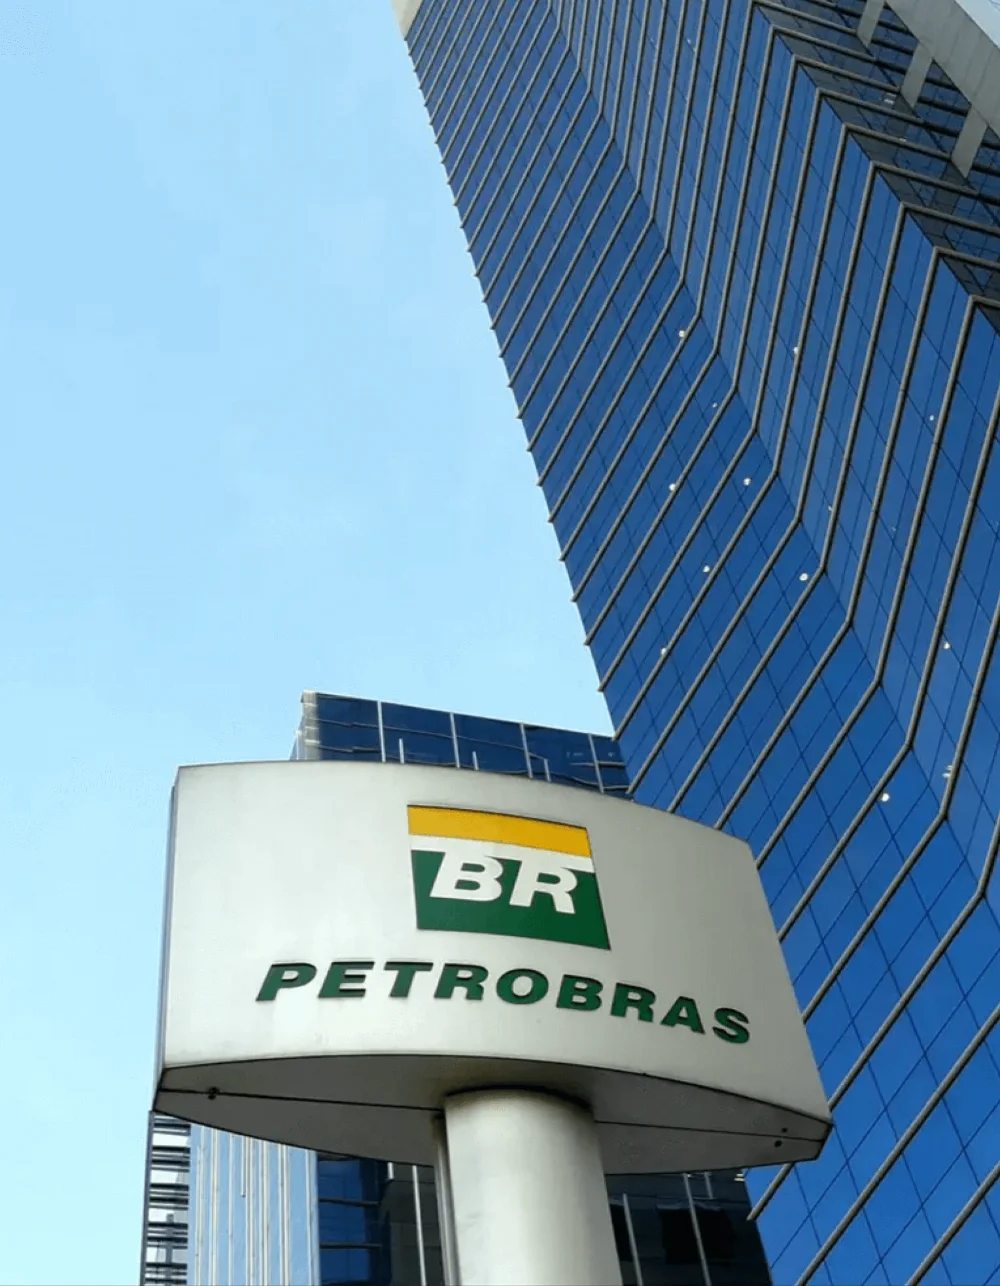 Petrobras brand on a metallic plate, in front of a company office.